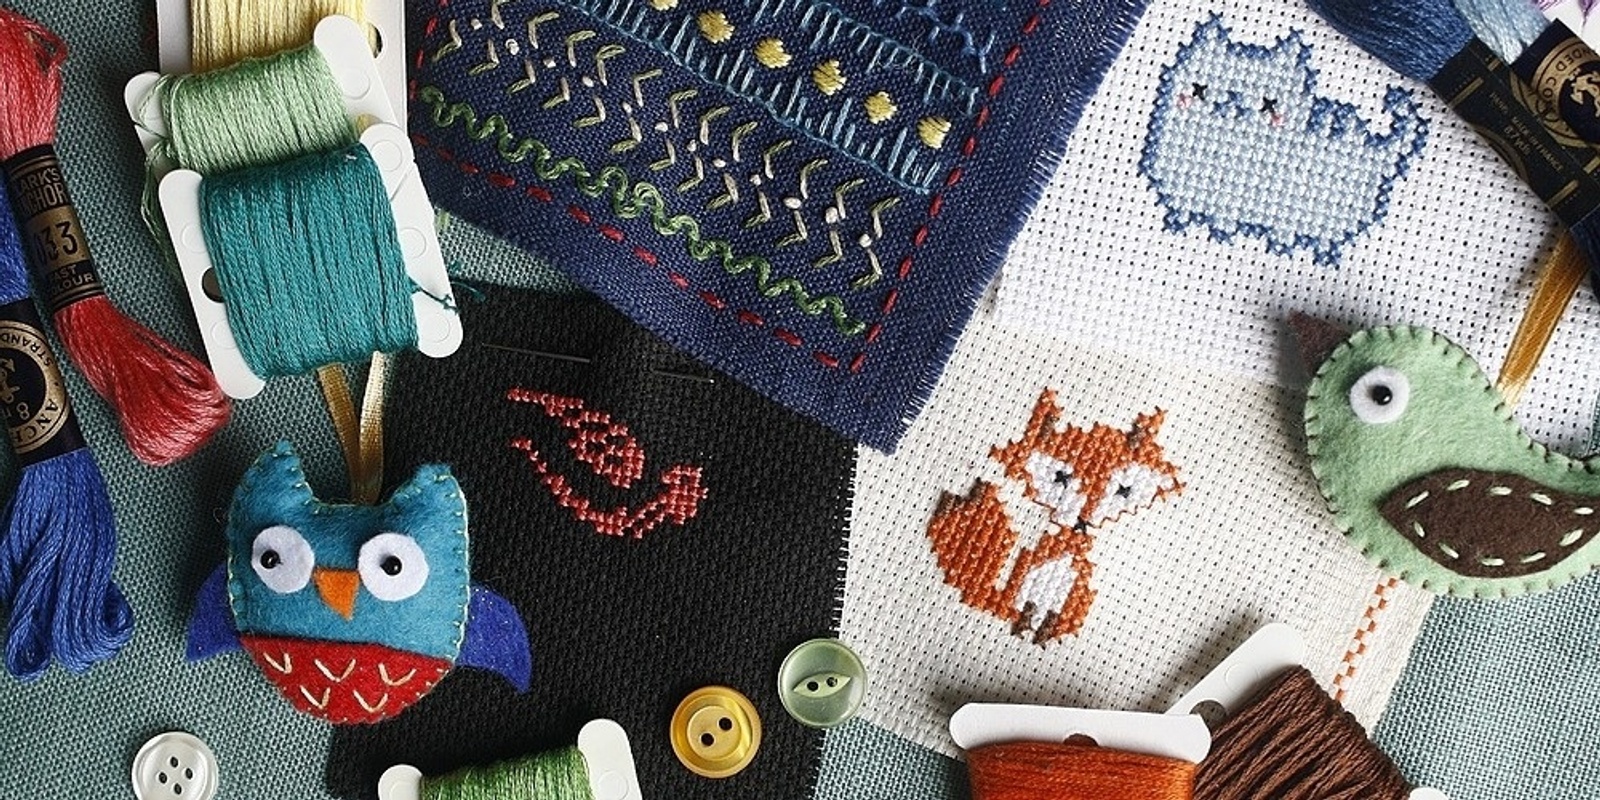 Cross Stitch For Beginners